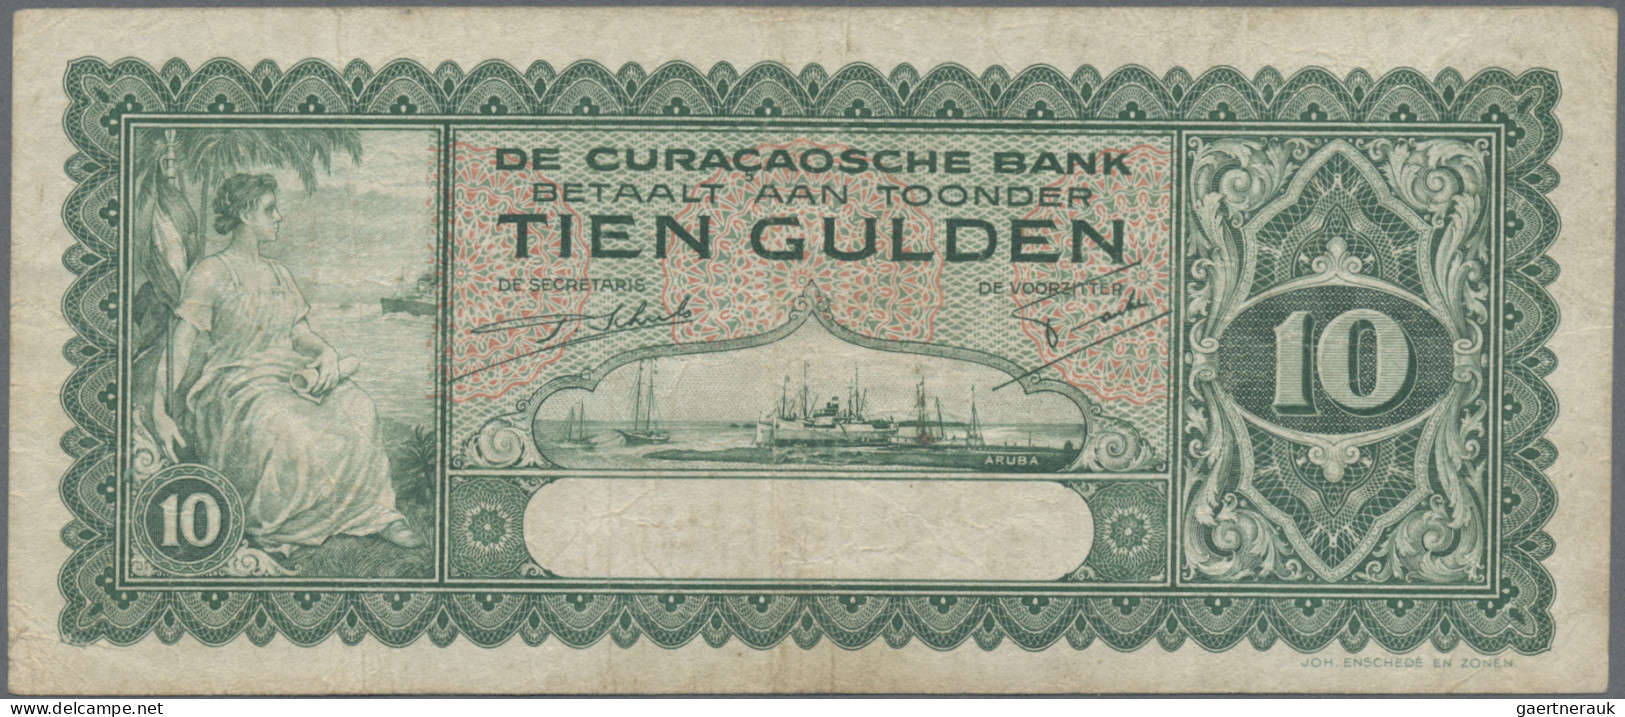 Curacao: De Curacaosche Bank, nice set with 5 banknotes, 1930-1942 series, with